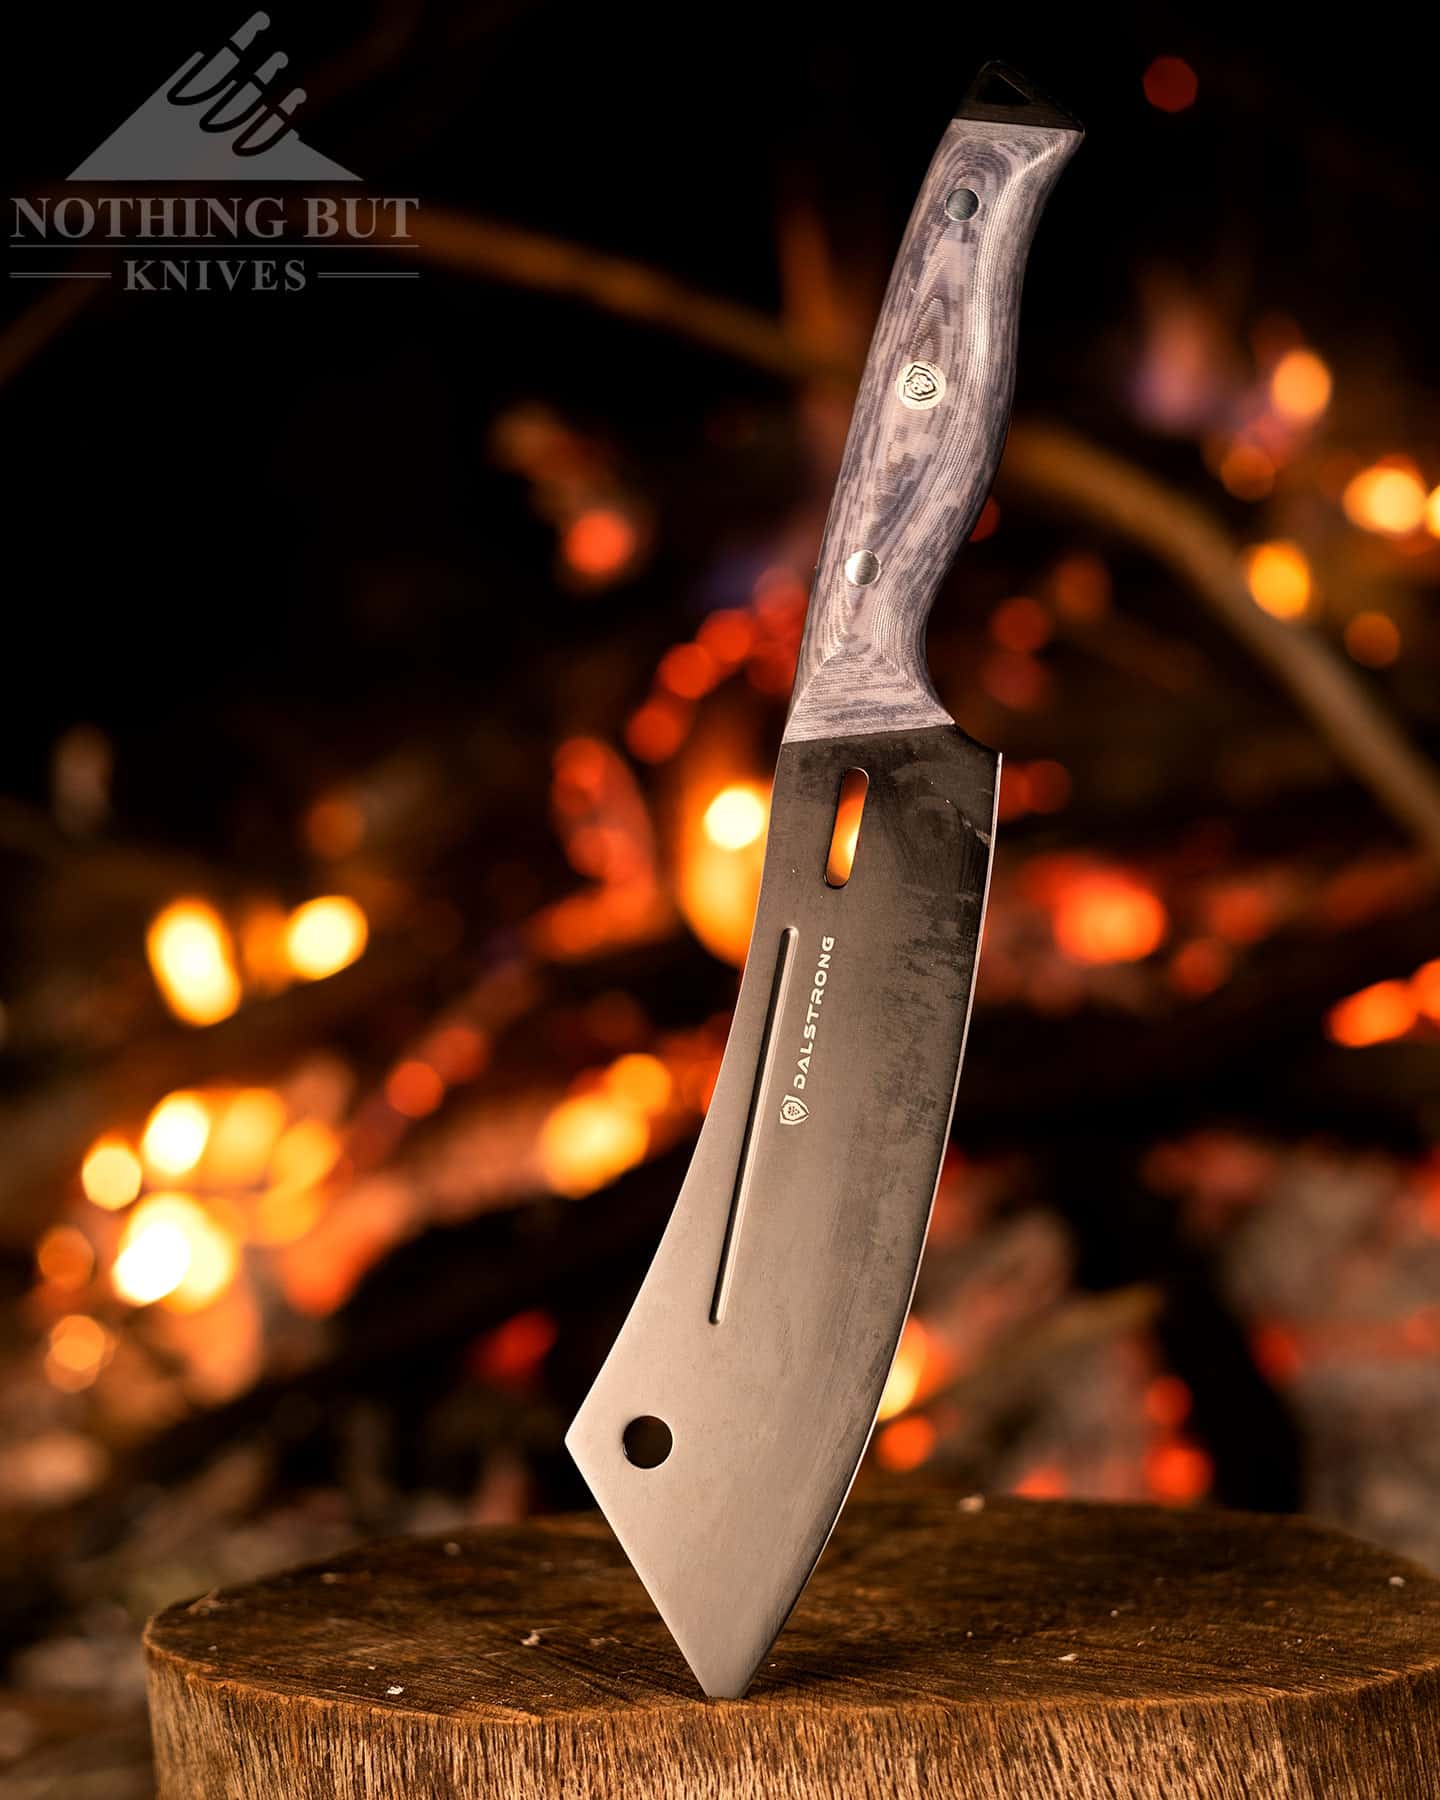 The Dalstrong Delta Wolf Crixus makes a great barbecue buddy. 